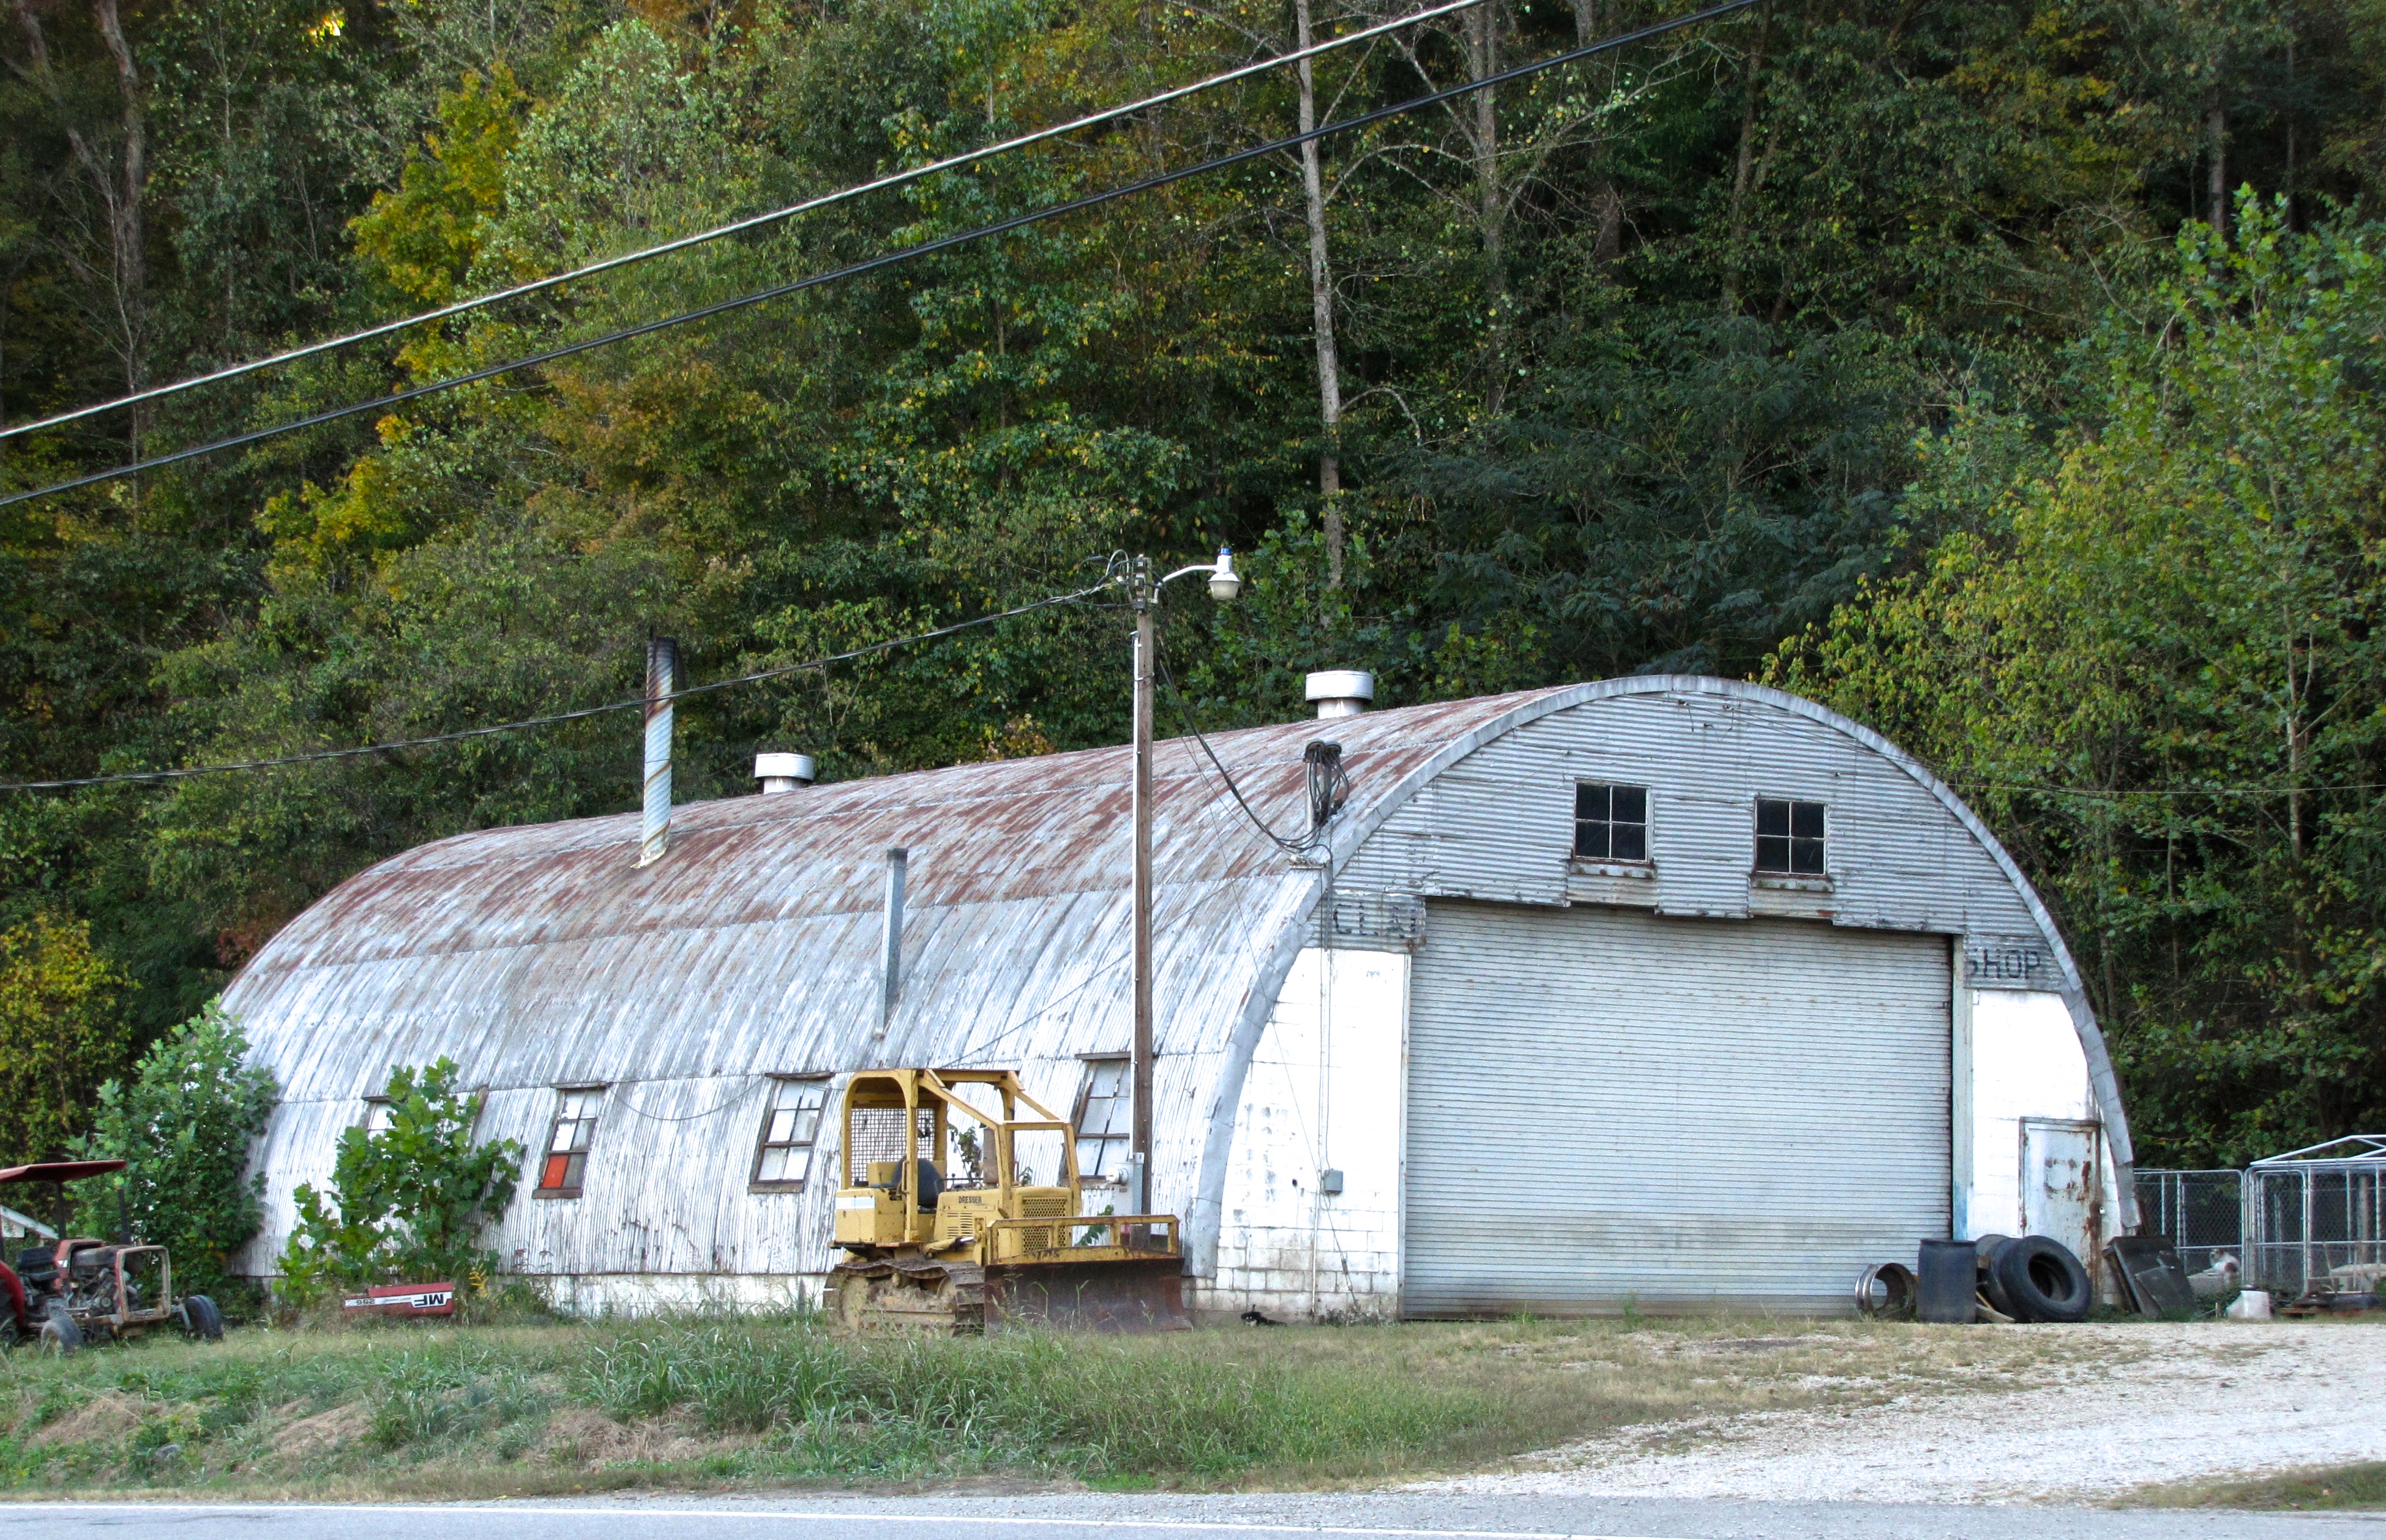 quonset hut in Privacy Policy, NY